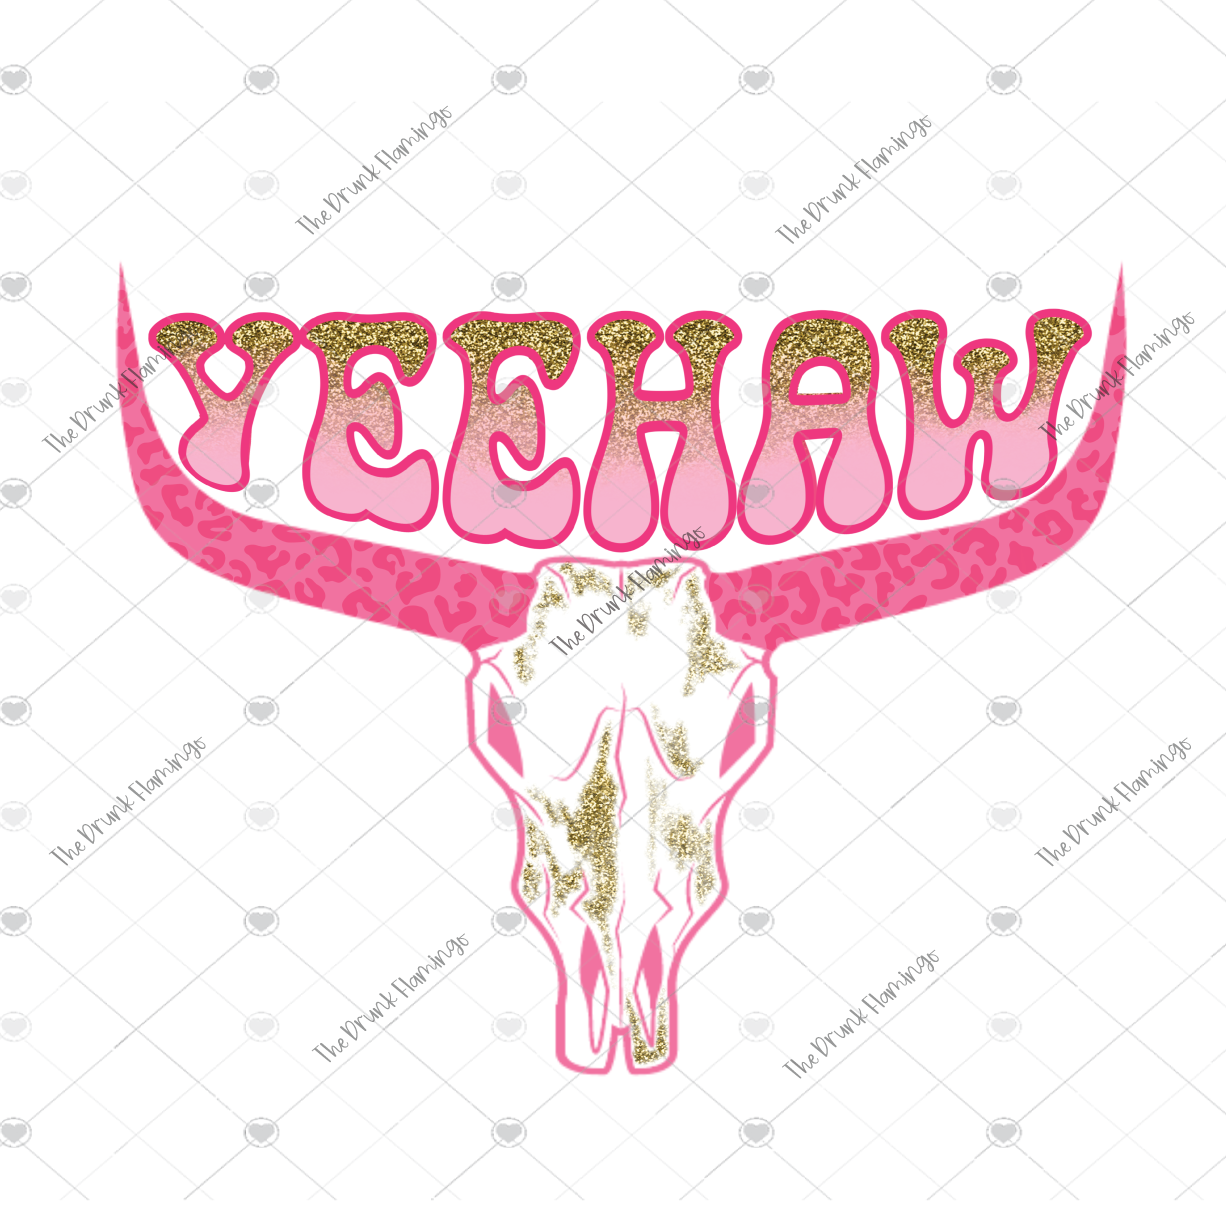 68- YEEHAW Pink WHITE backed decal